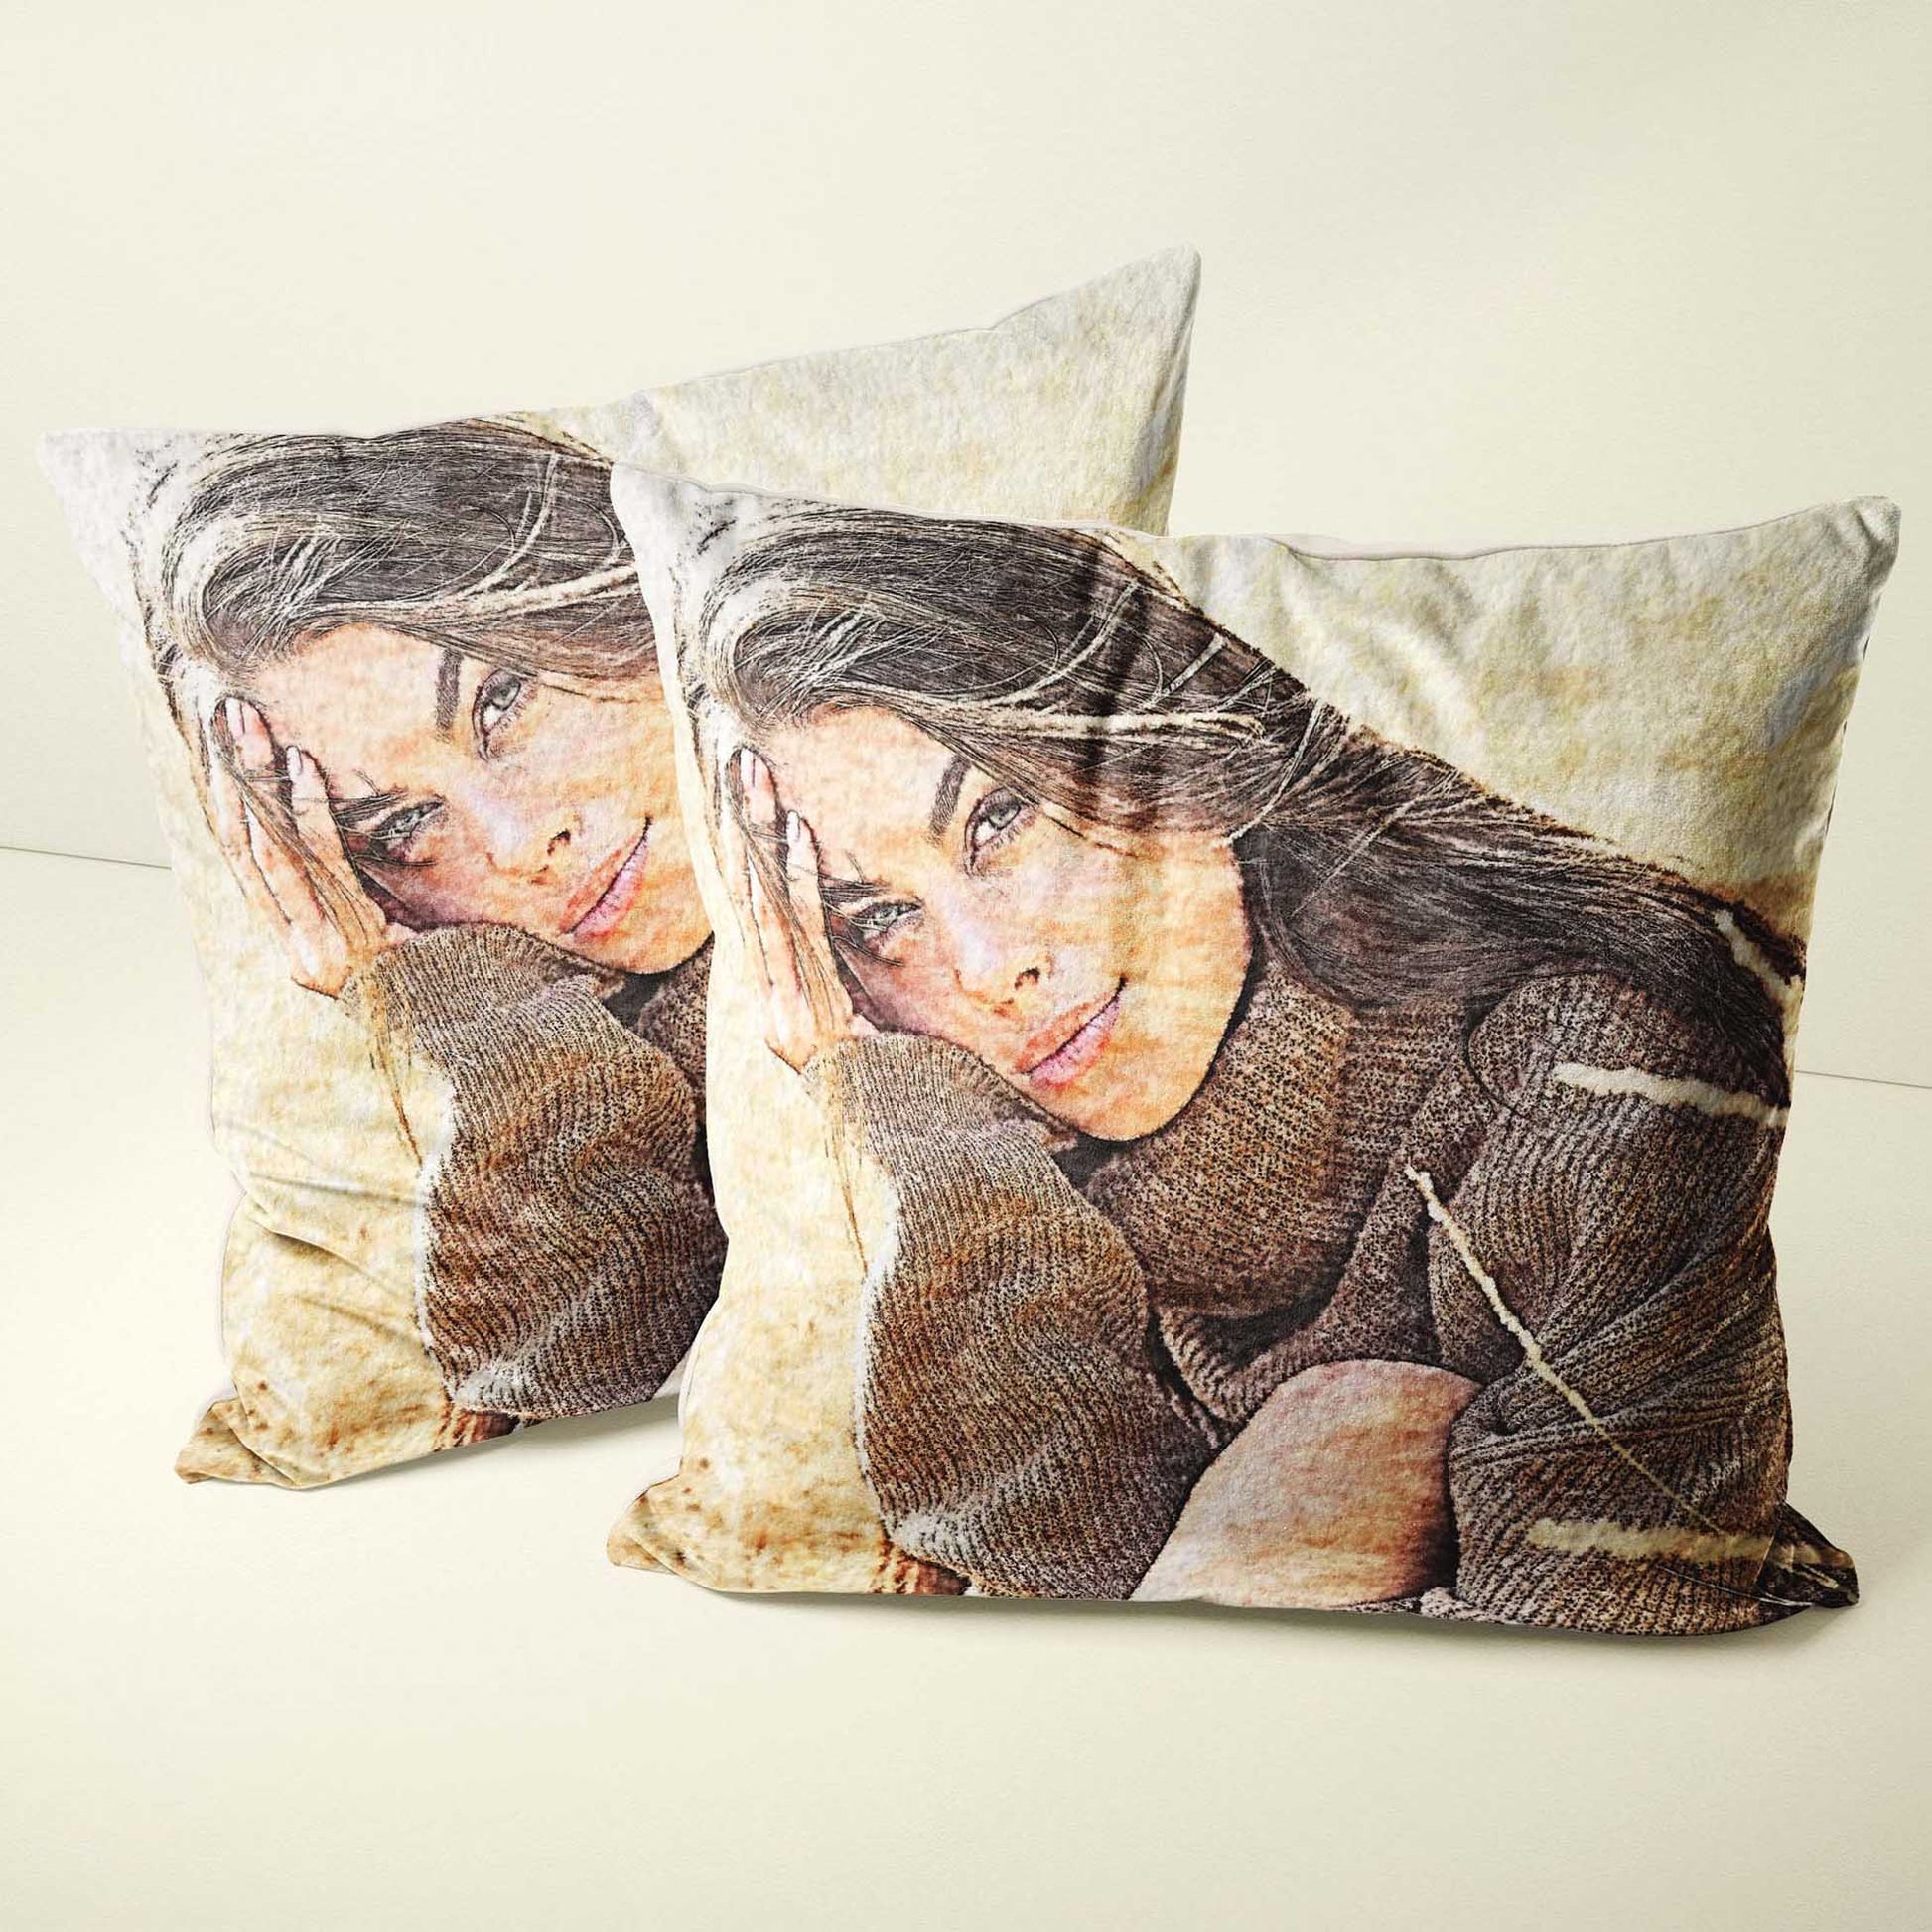 Transform your home decor with a personalized watercolor painting cushion. Crafted from soft velvet fabric, this stylish and chic accessory creates a cozy and inviting atmosphere. The ability to print from your photo adds a personal touch